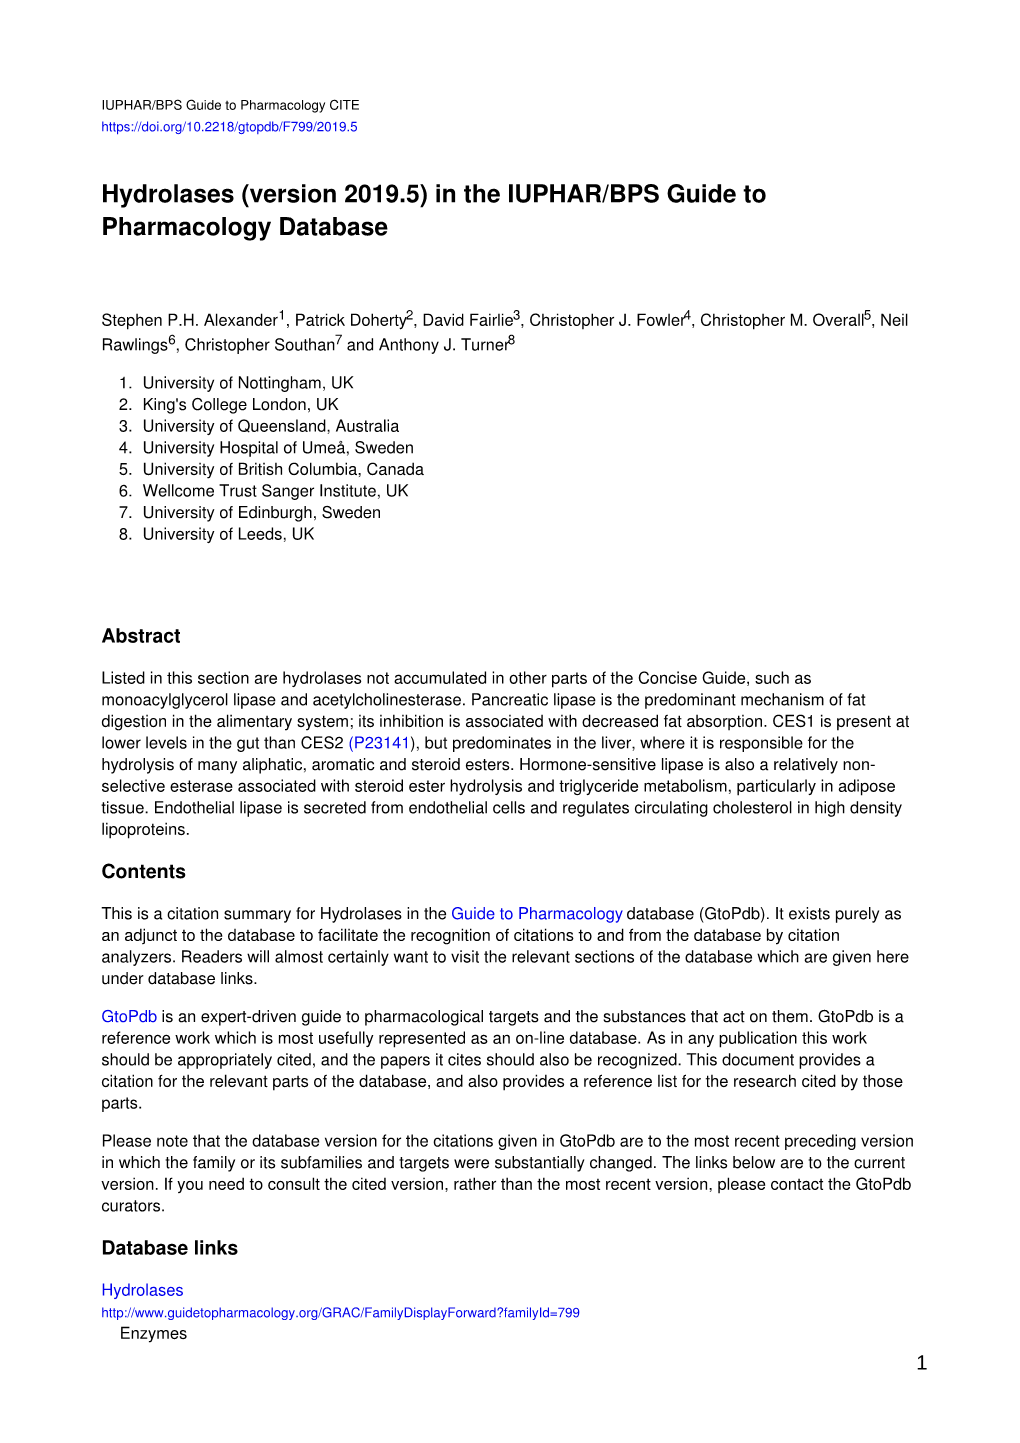 Hydrolases (Version 2019.5) in the IUPHAR/BPS Guide to Pharmacology Database